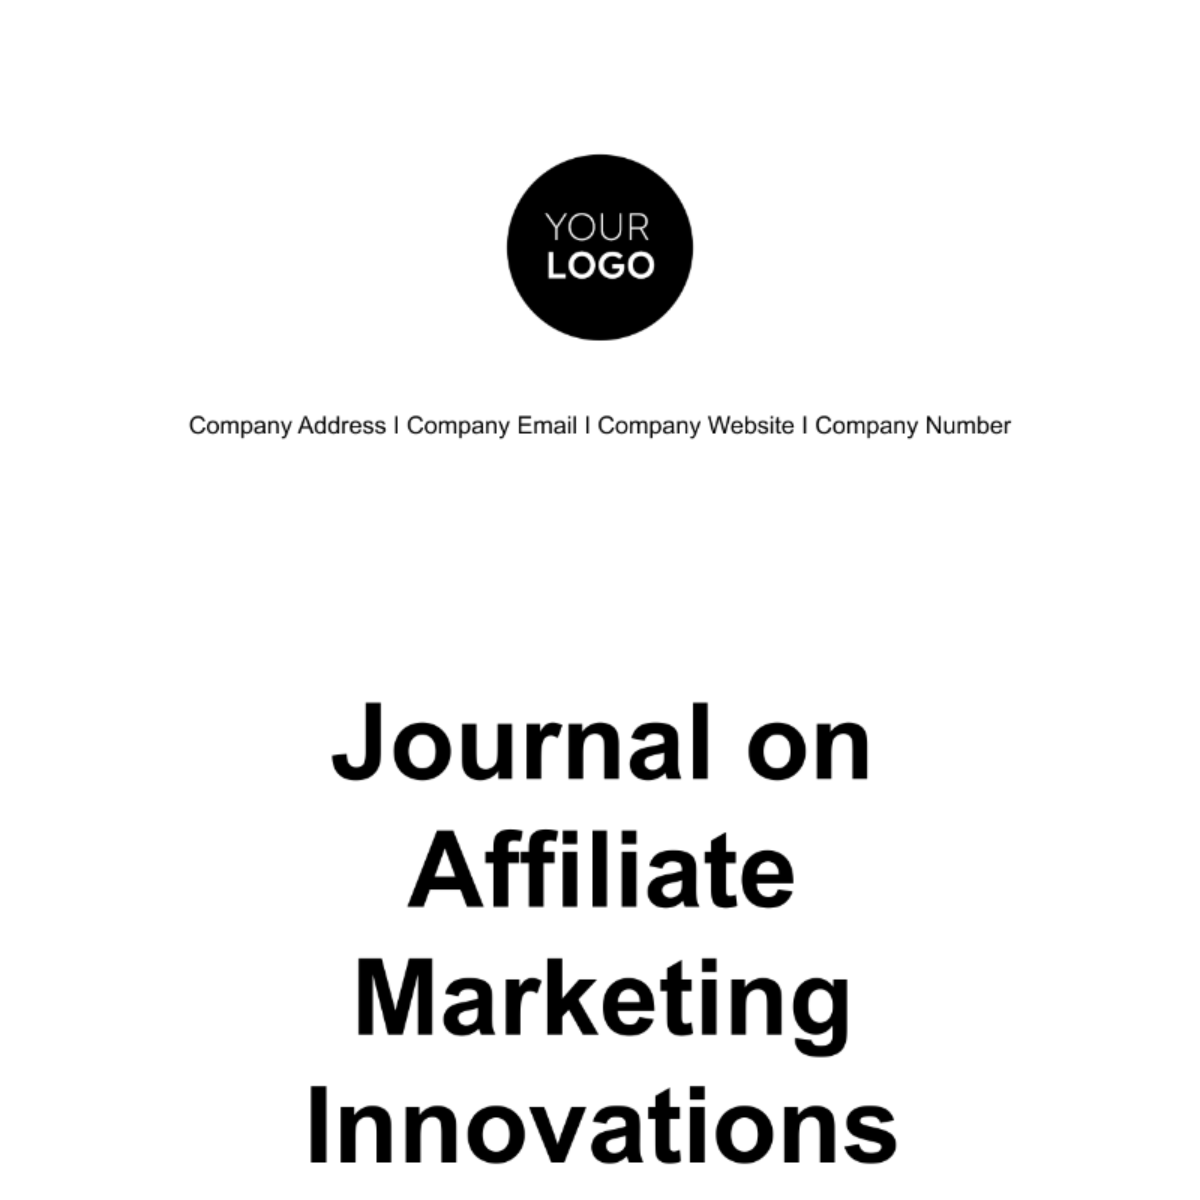 Journal on Affiliate Marketing Innovations Template